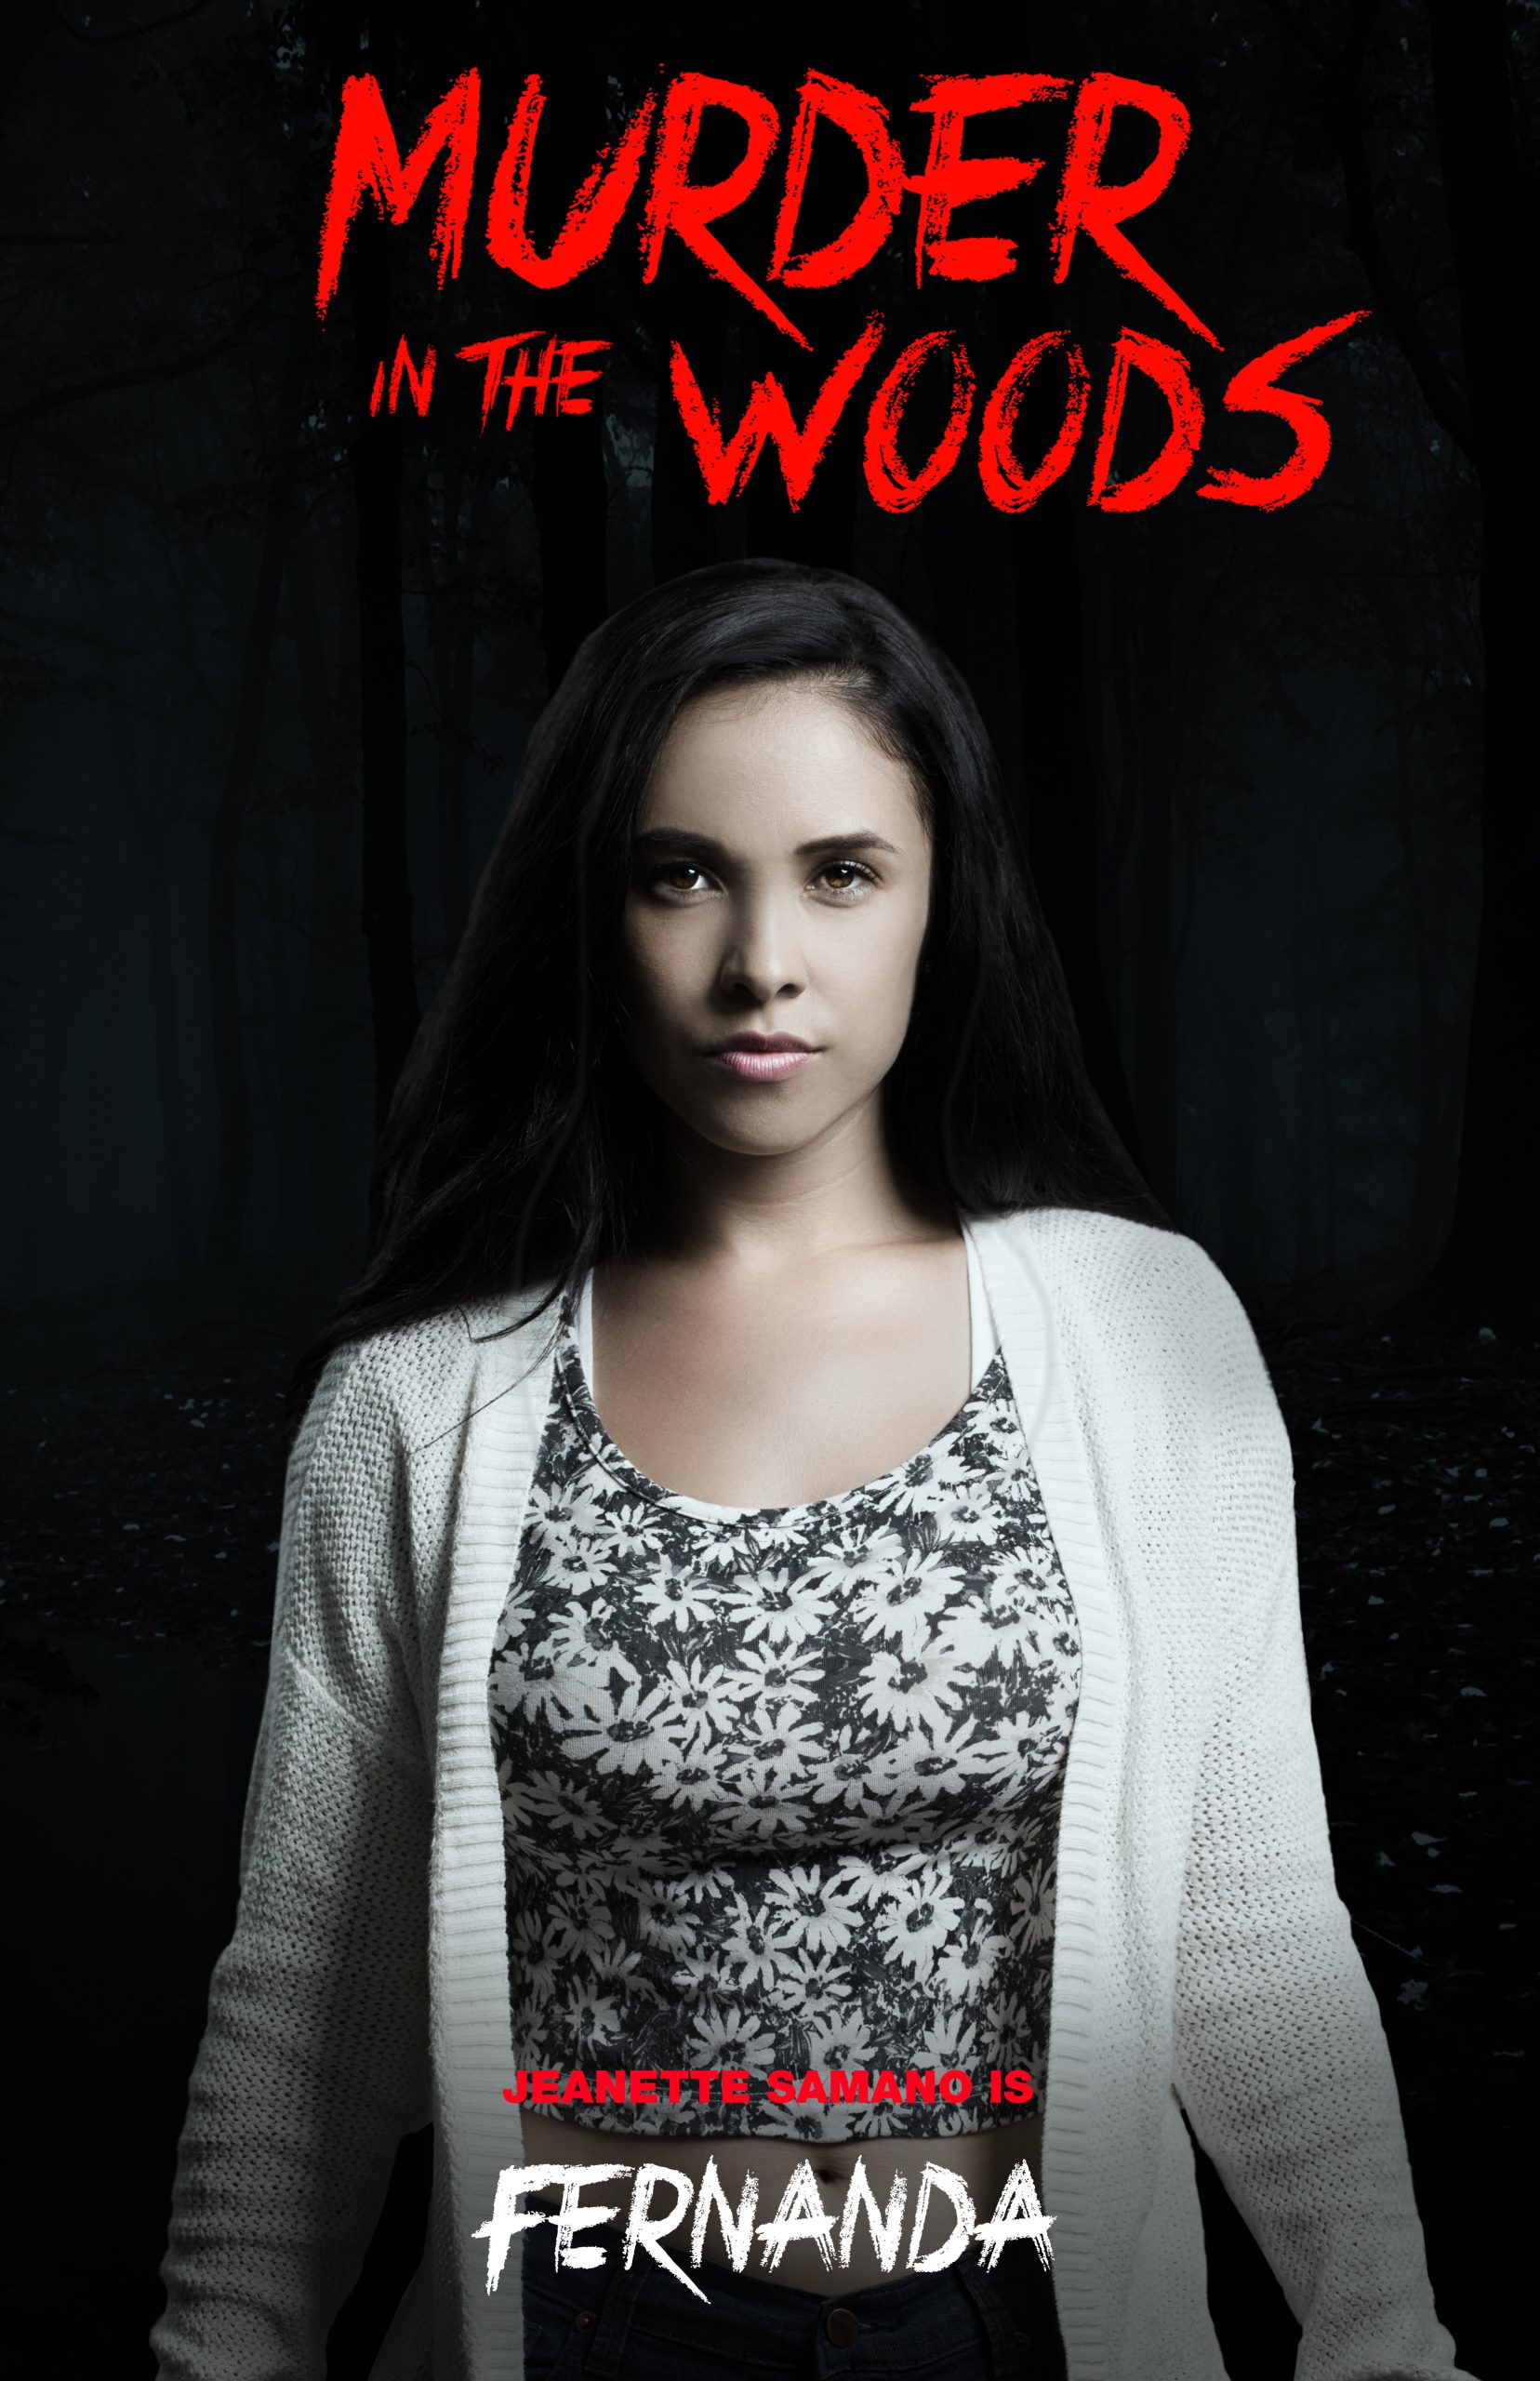 Jeanette Samano in Murder in the Woods